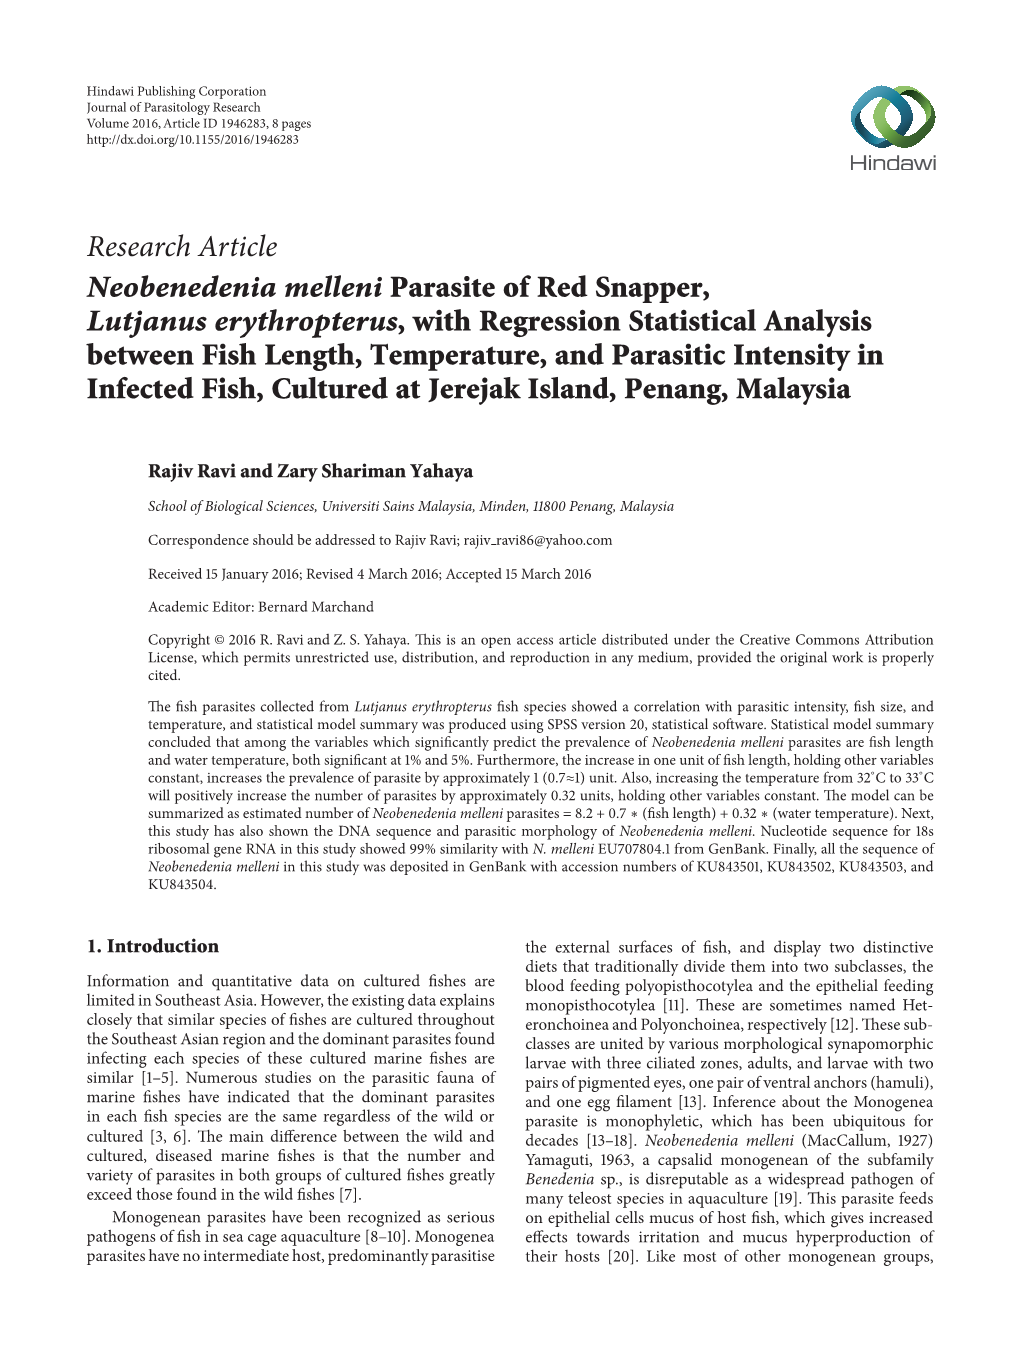 Research Article Neobenedenia Melleni Parasite of Red Snapper, Lutjanus Erythropterus, with Regression Statistical Analysis Betw